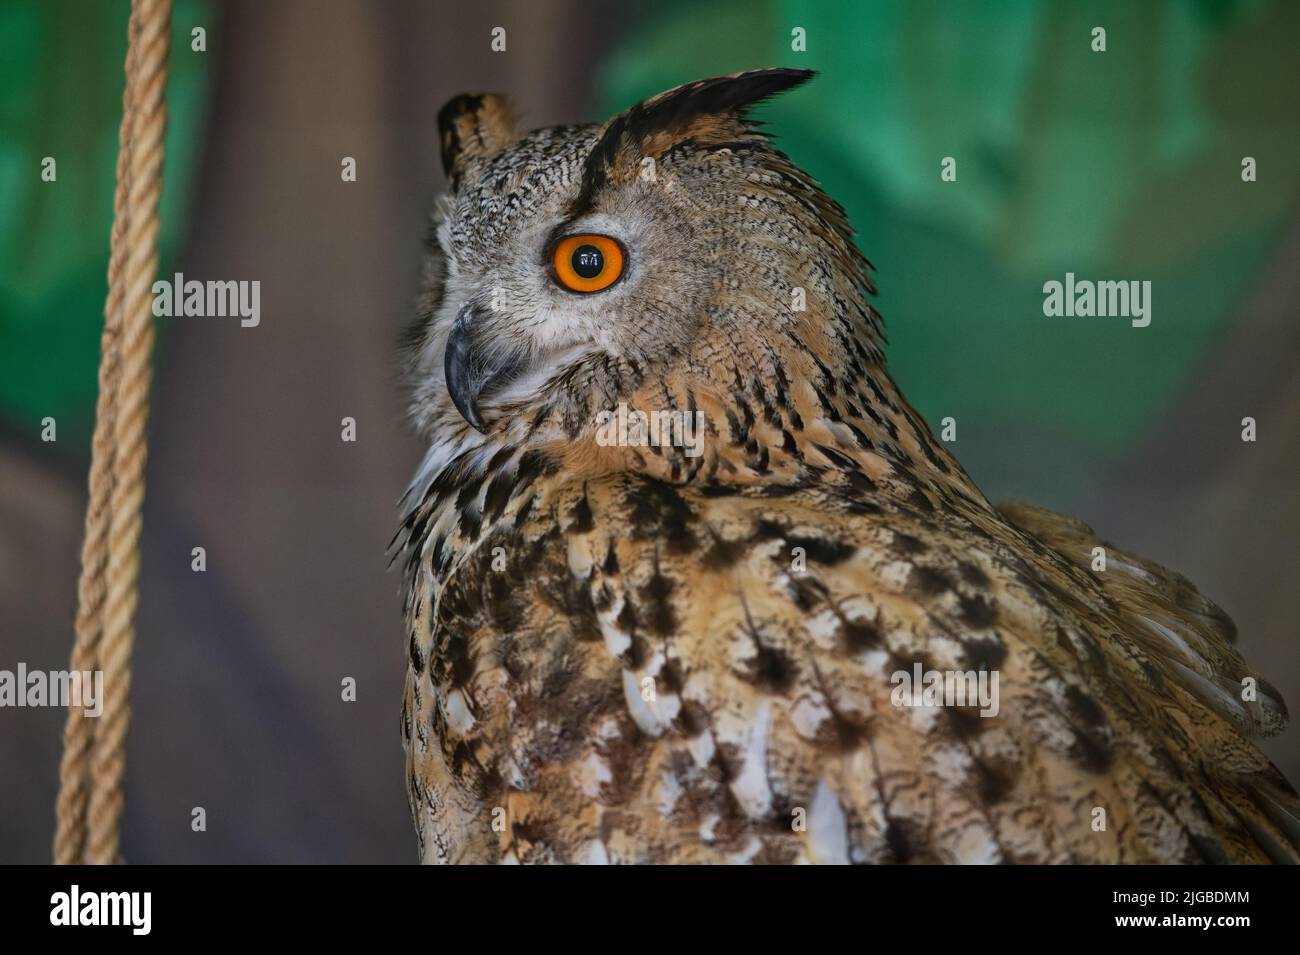 The common owl, bubo bubo, sits in the zoo enclosure and looks to the left. Portrait. Close-up. Stock Photo